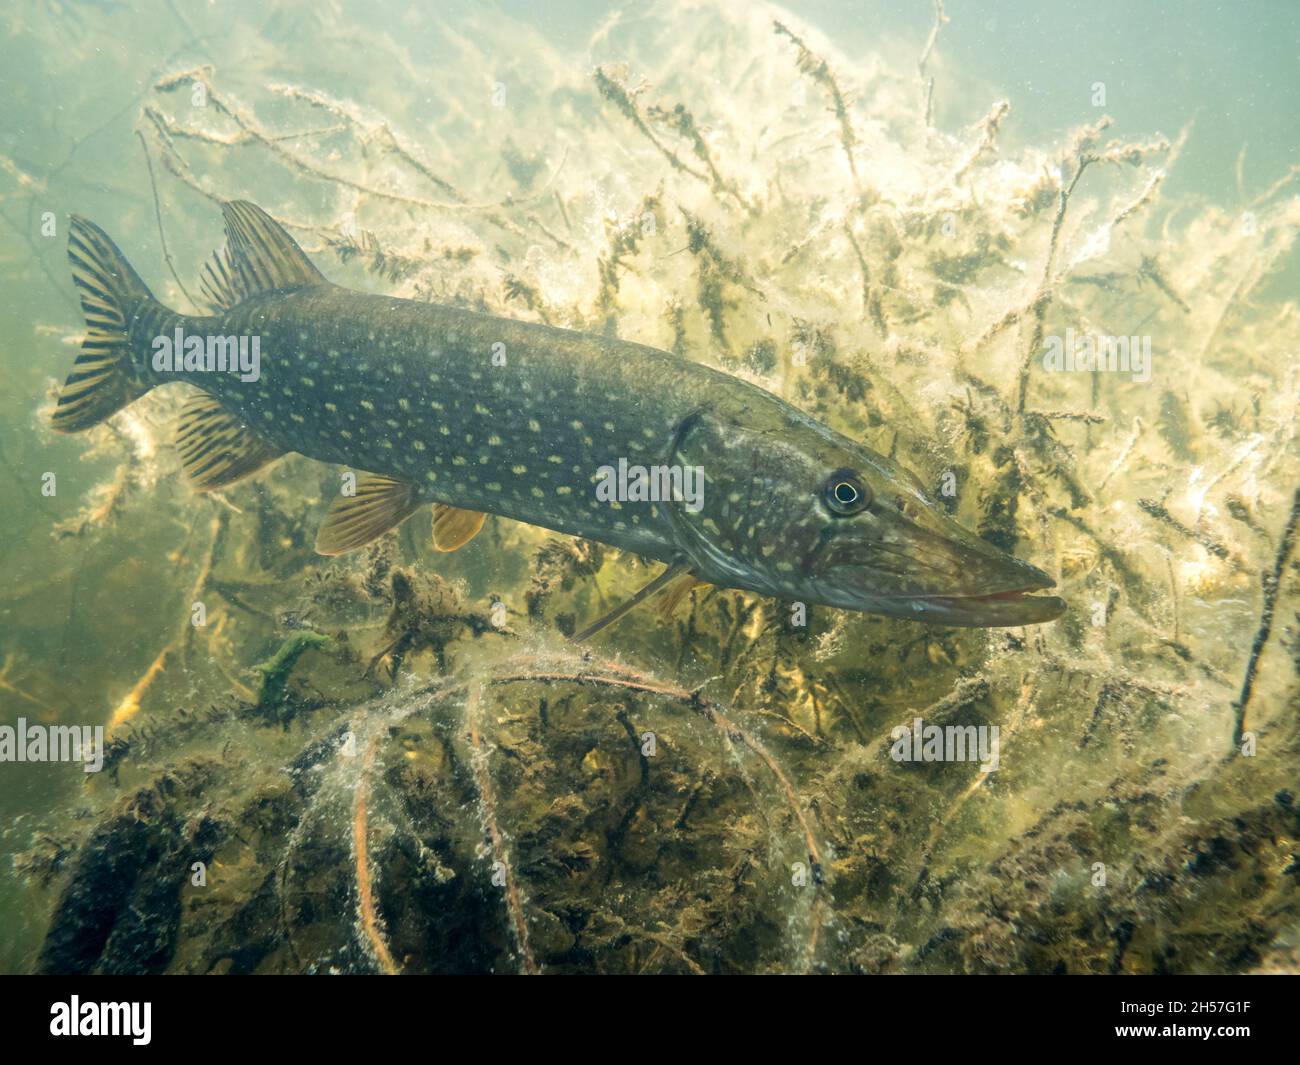 Northern pike underwater with tree branches in the background Stock Photo